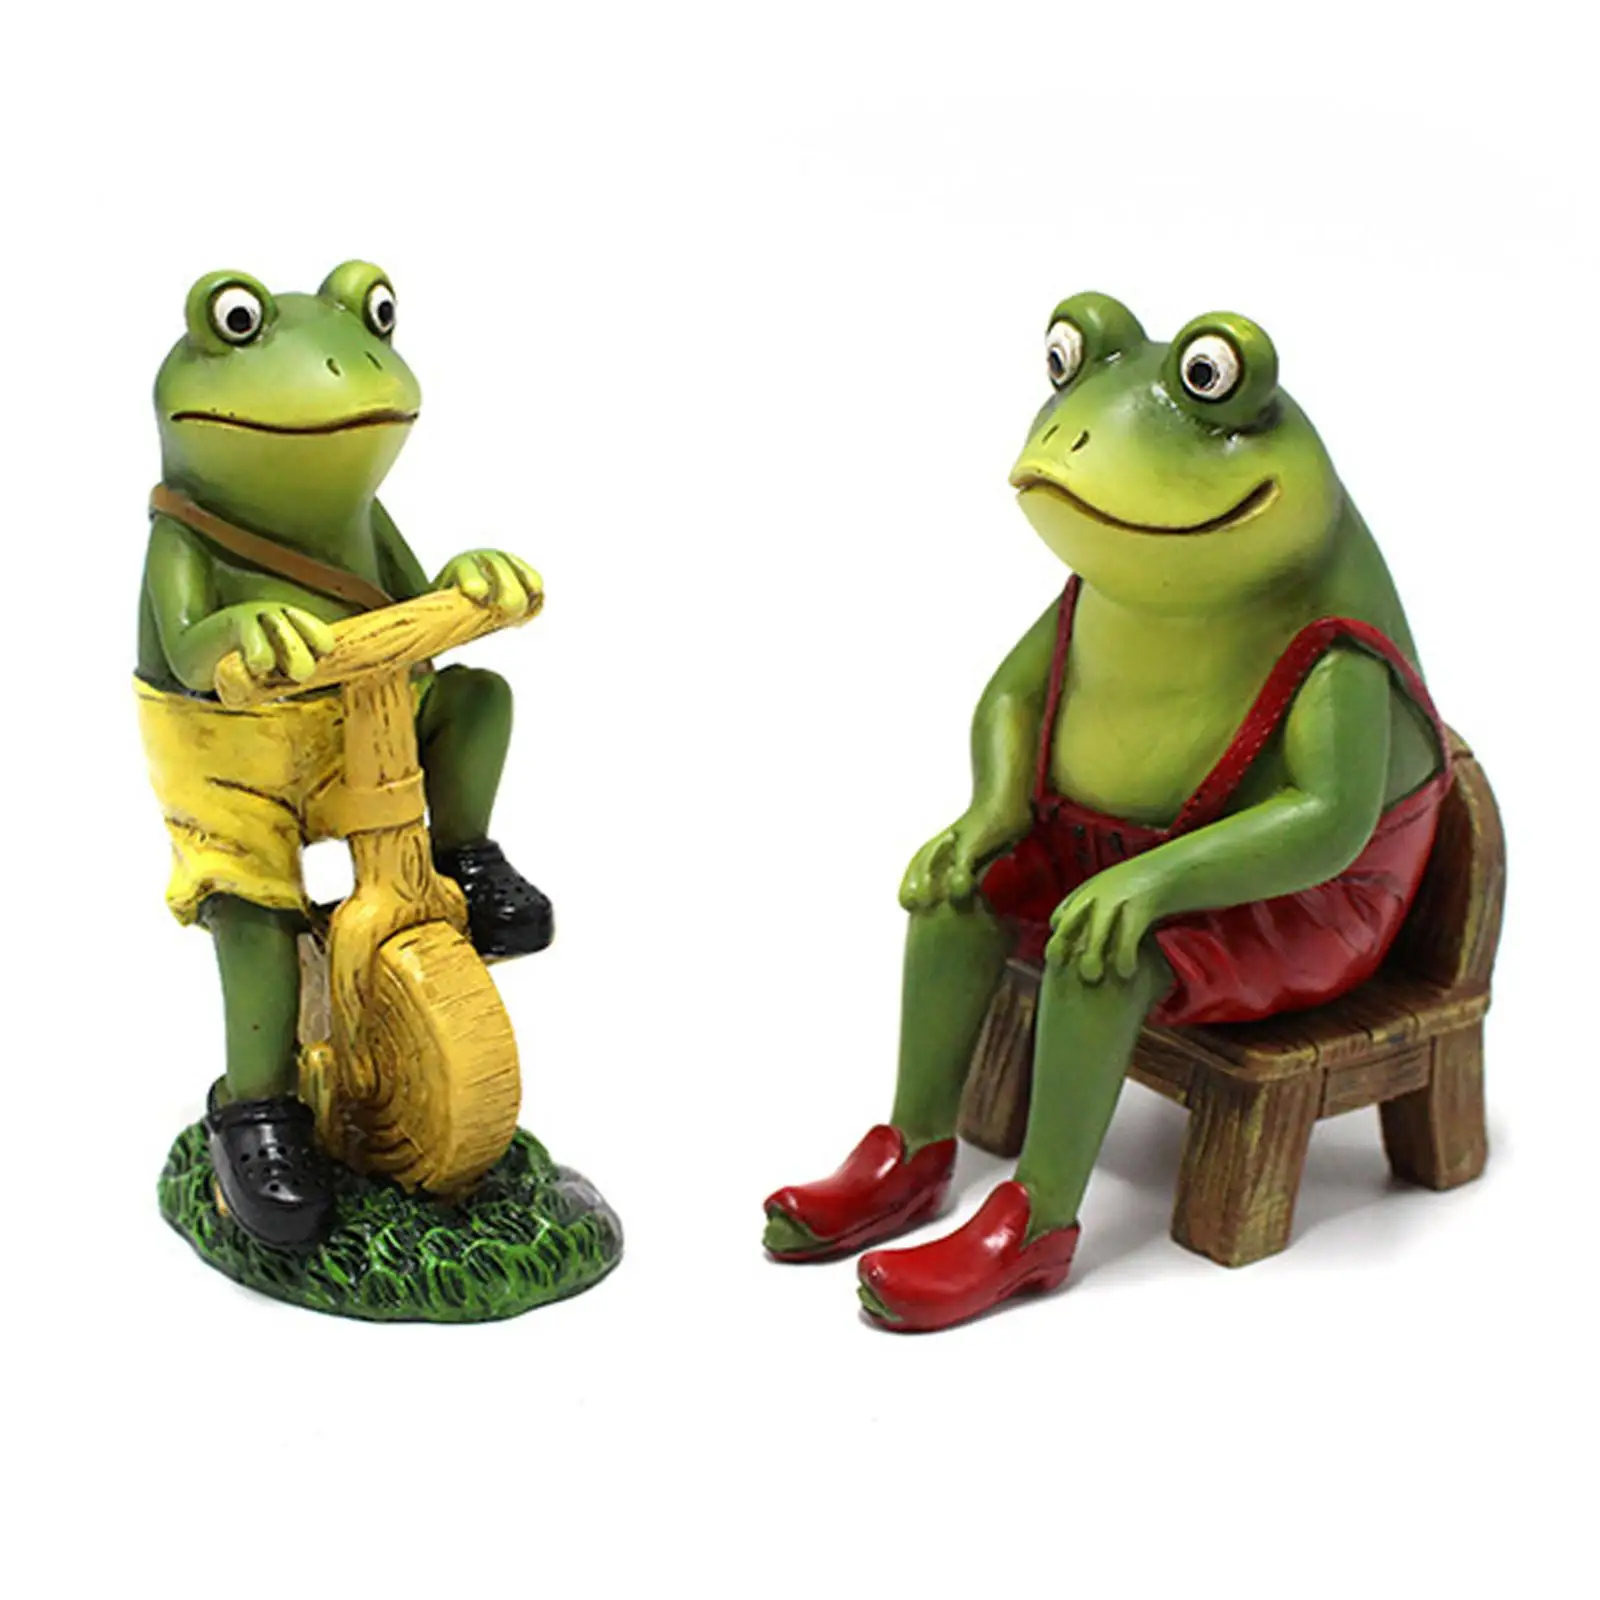 

Cute Frog Figurine Collectibles Crafts Animal Resin Artwork Sculpture for Party Indoor Outdoor Tabletop Decoration Centerpiece